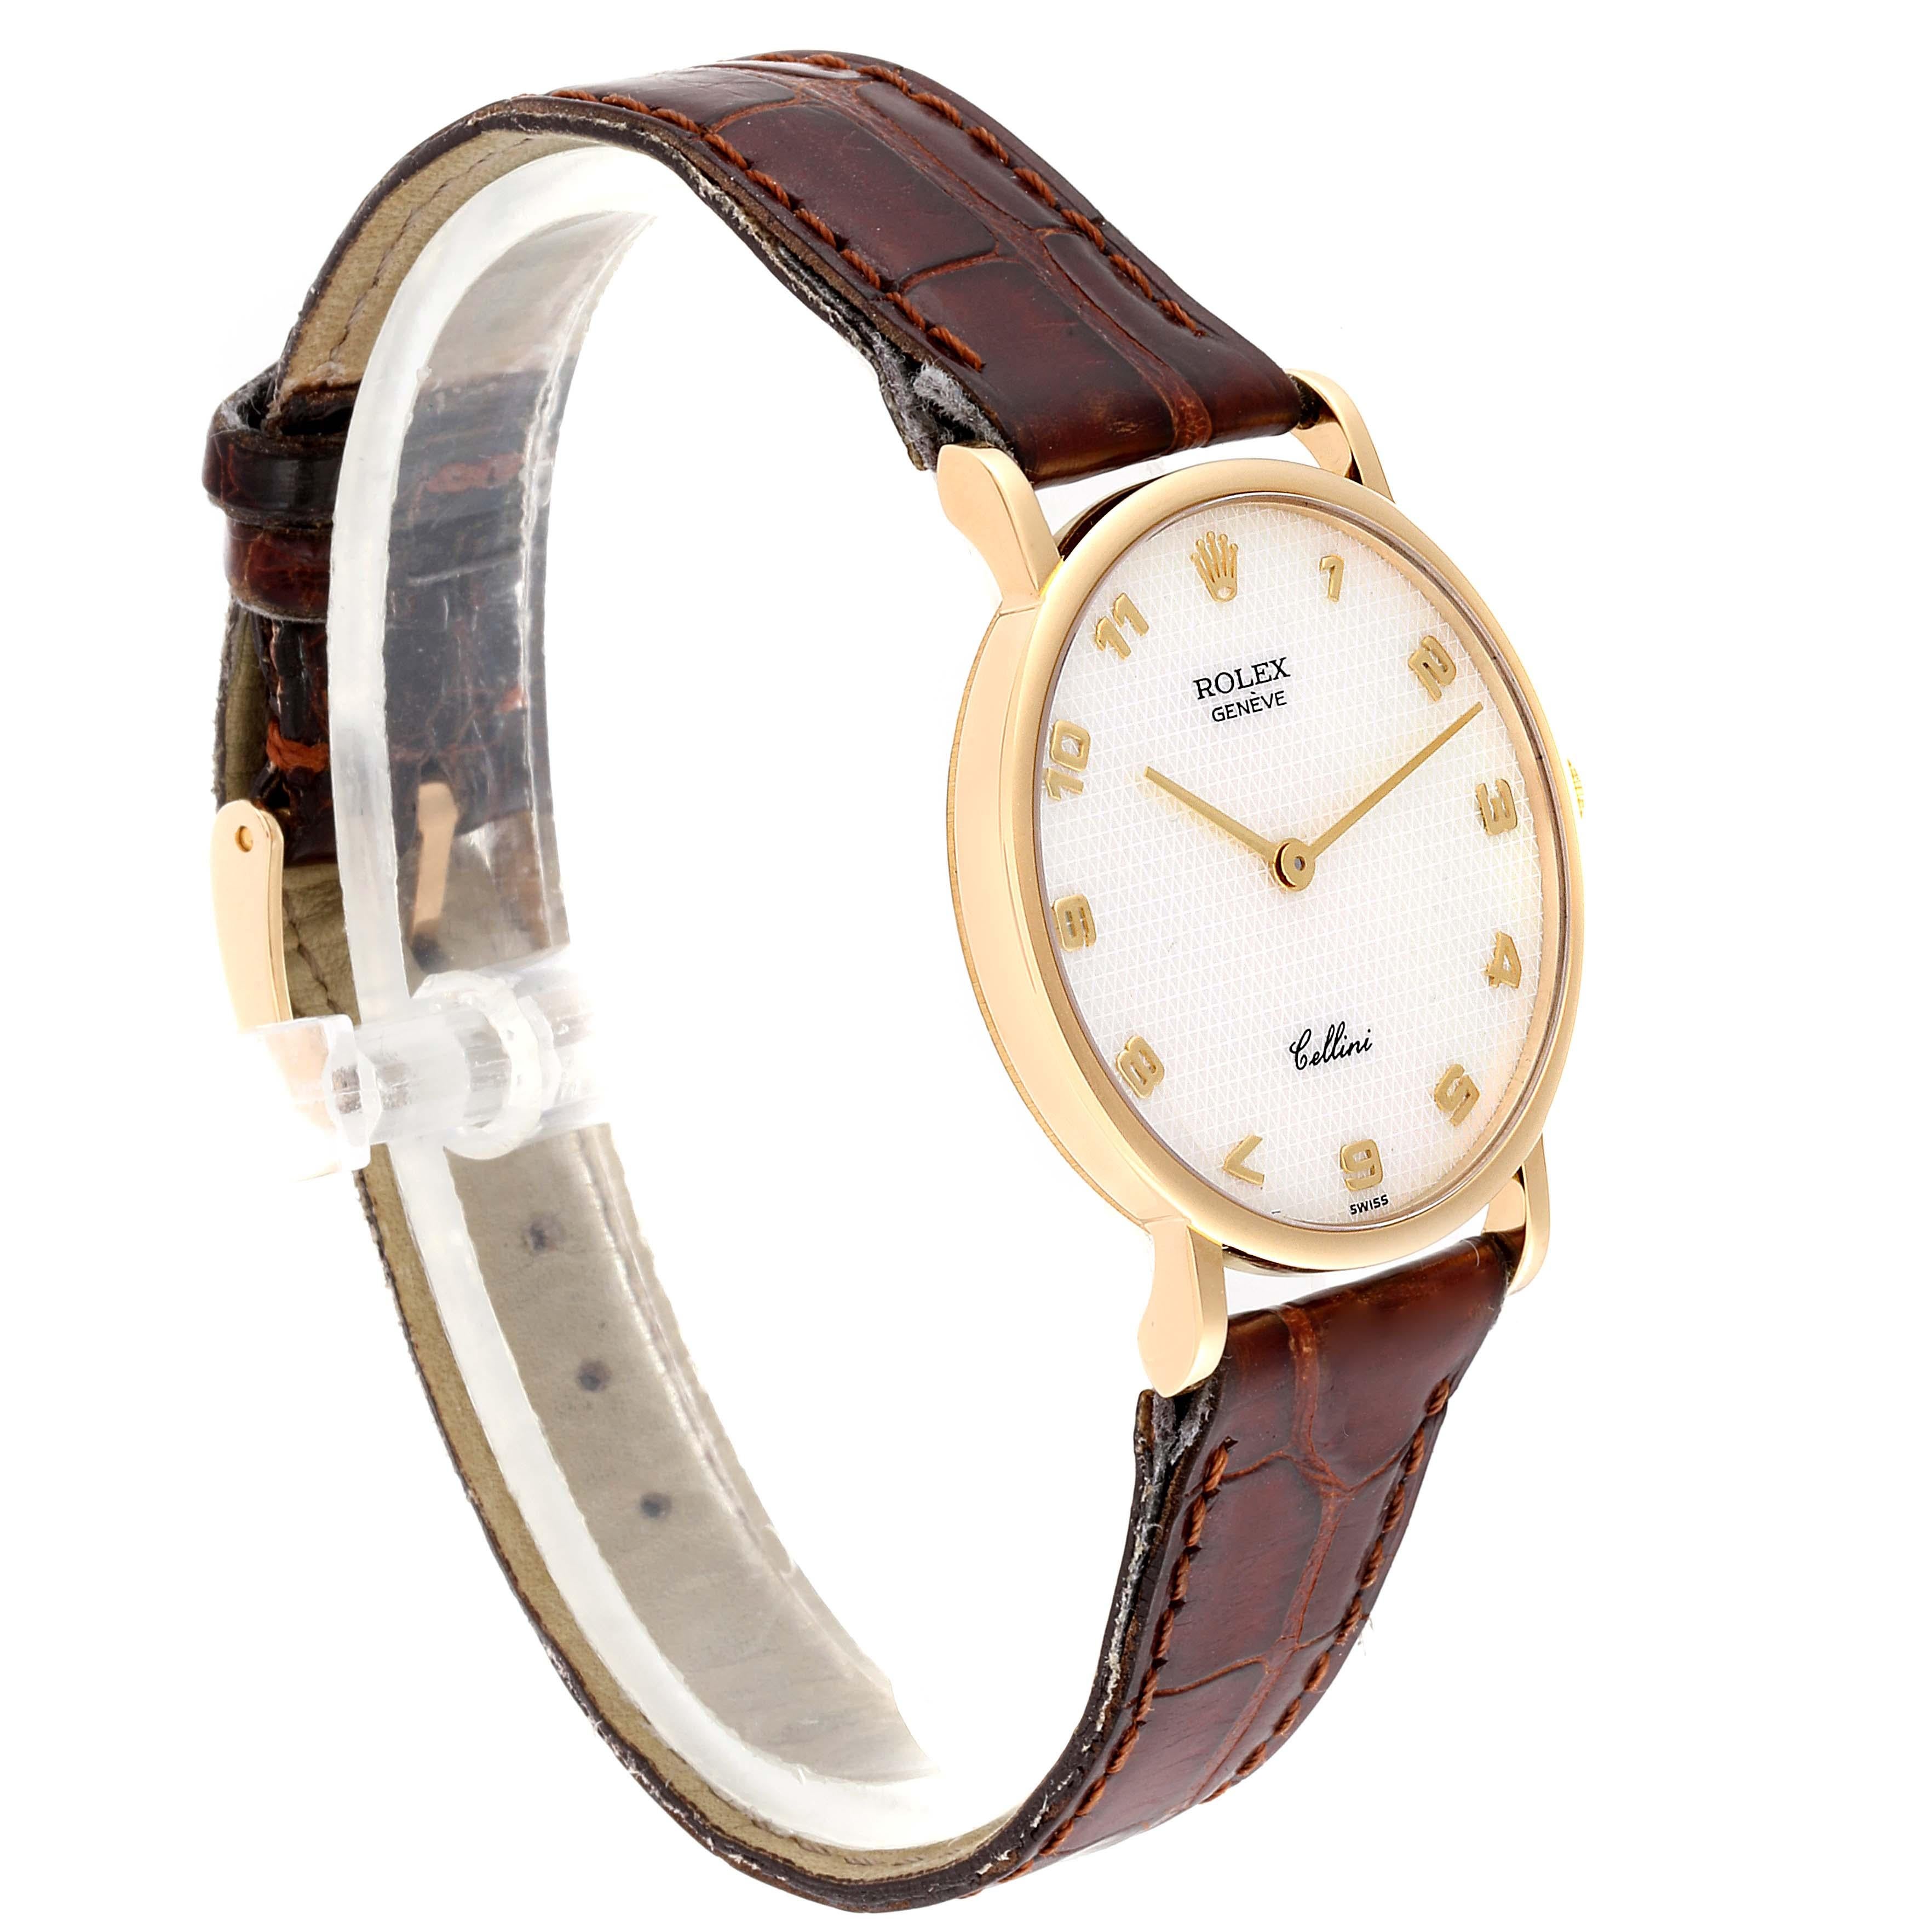 Rolex Cellini Classic Yellow Gold Mother of Pearl Unisex Watch 5112 In Excellent Condition For Sale In Atlanta, GA